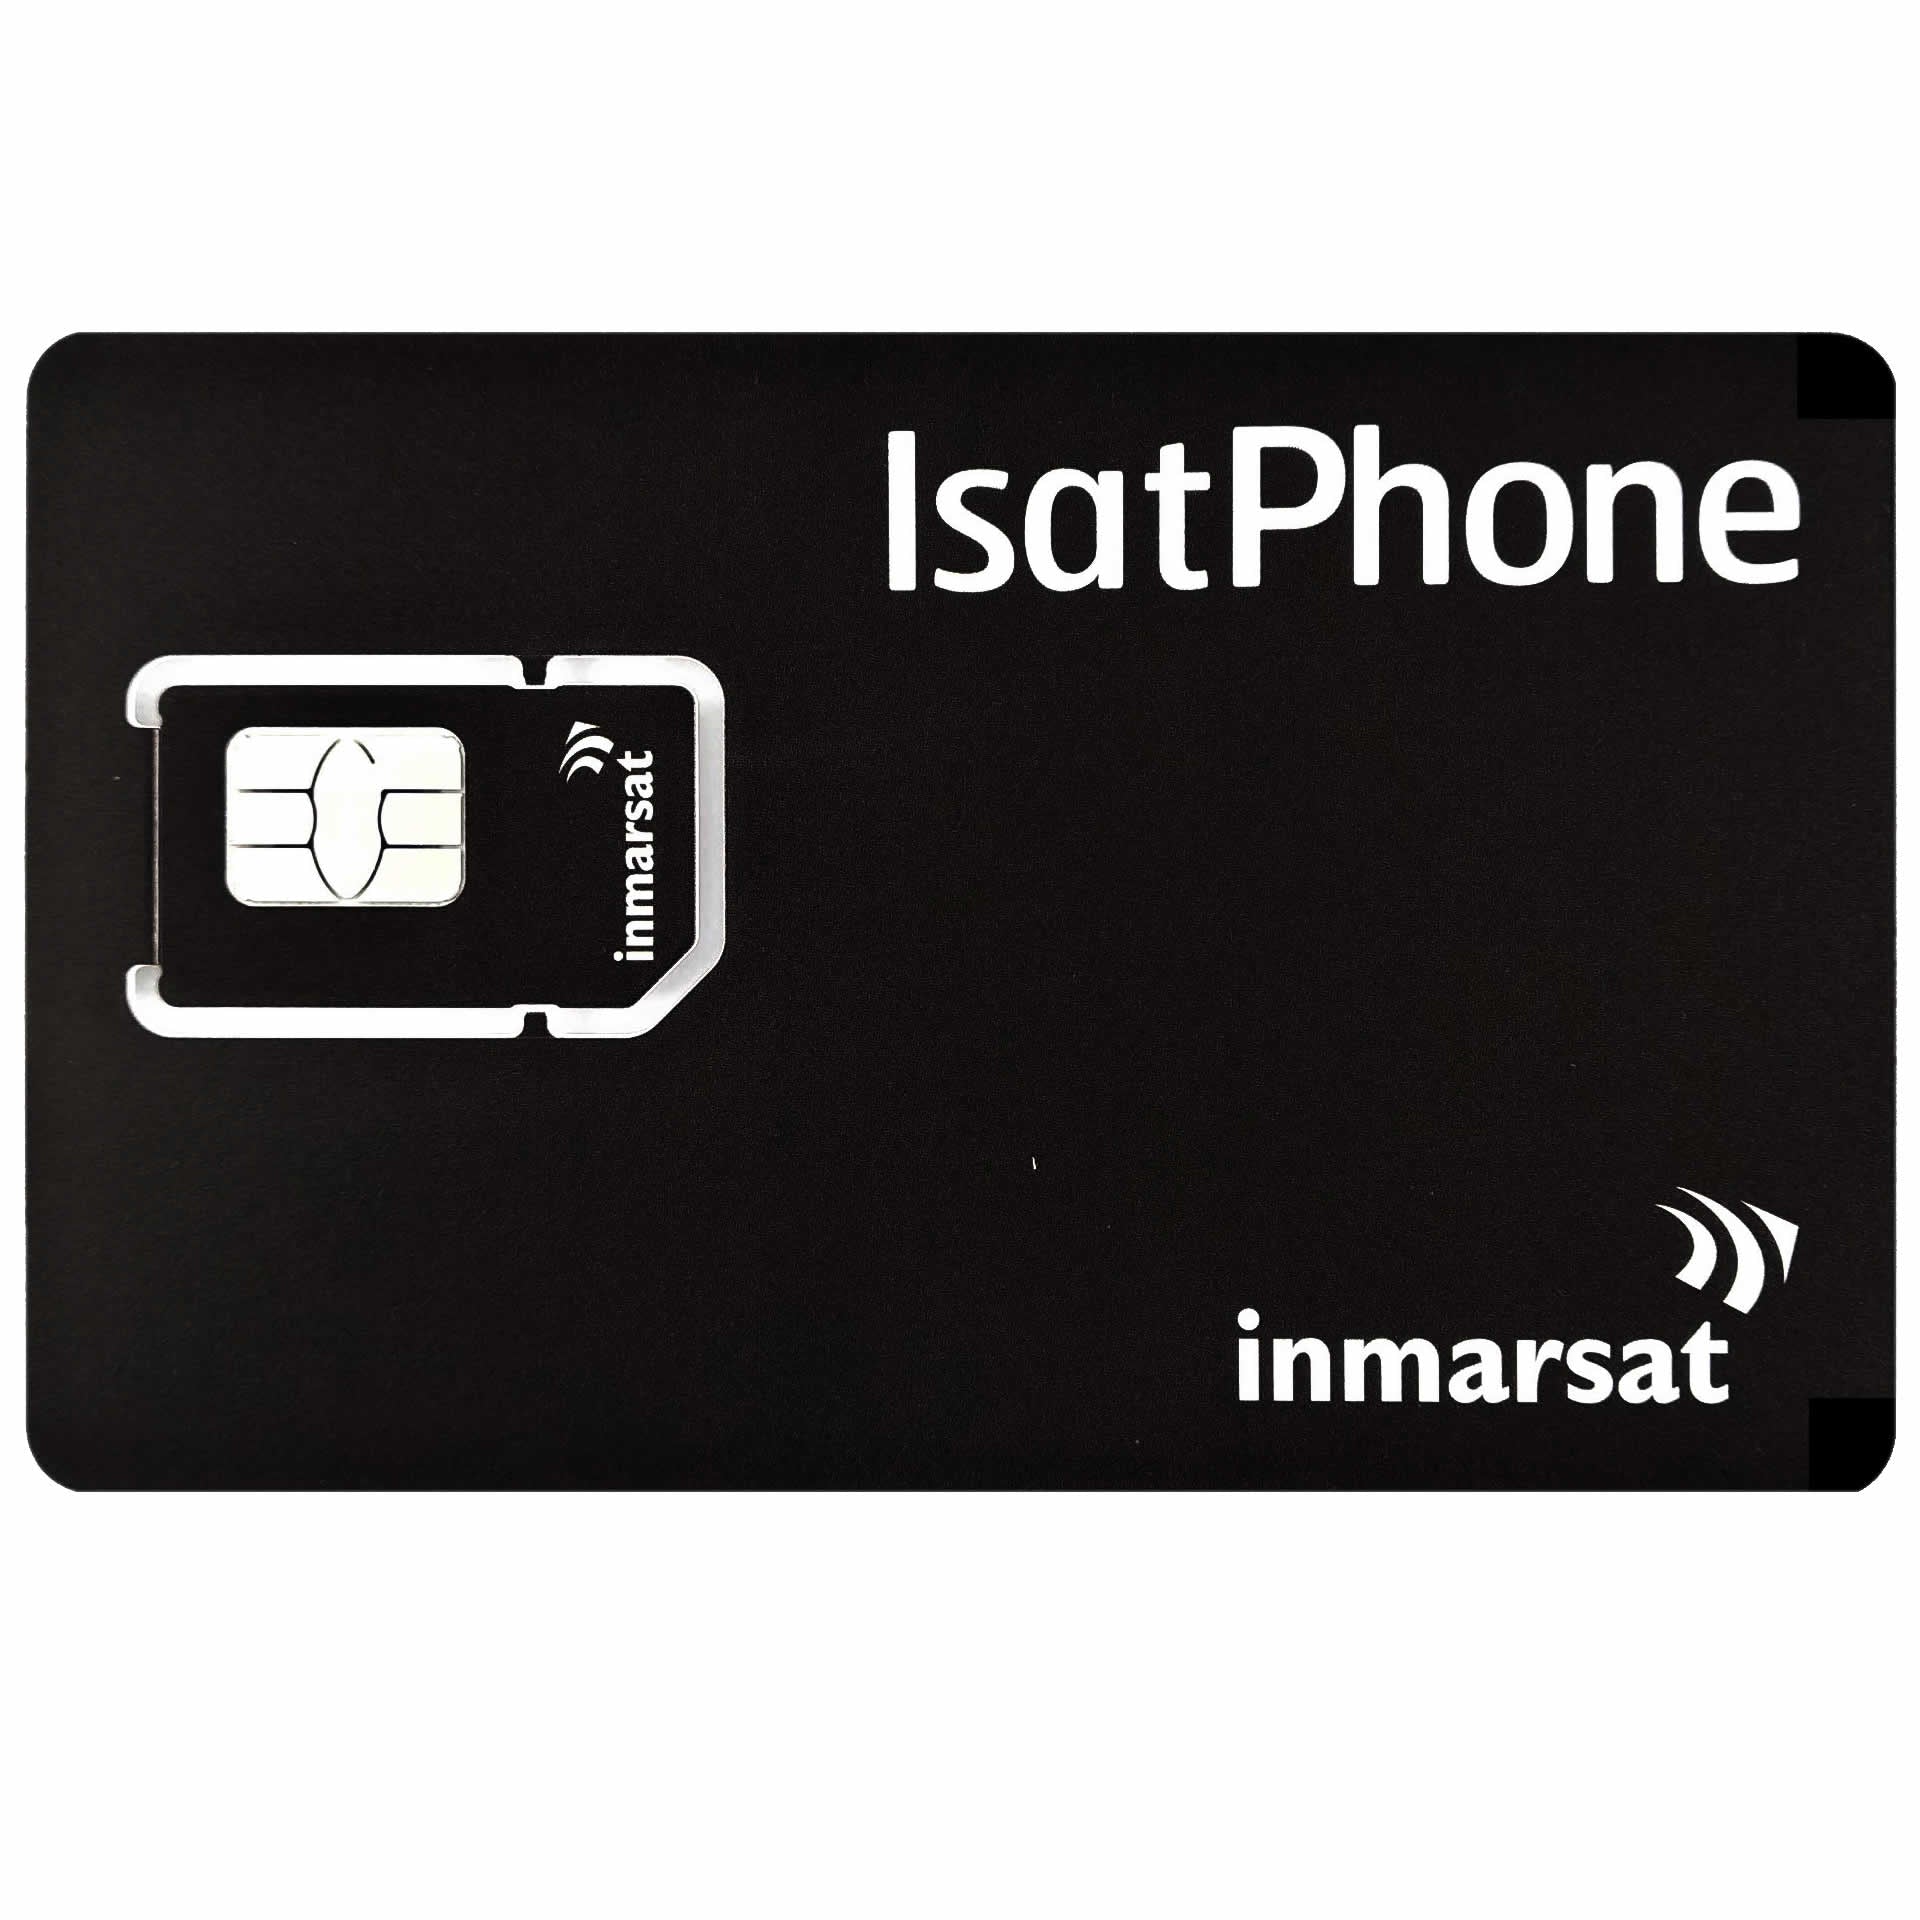 Prepaid INMARSAT Rechargeable ISATPHONE Card - 30 DAY REFILL